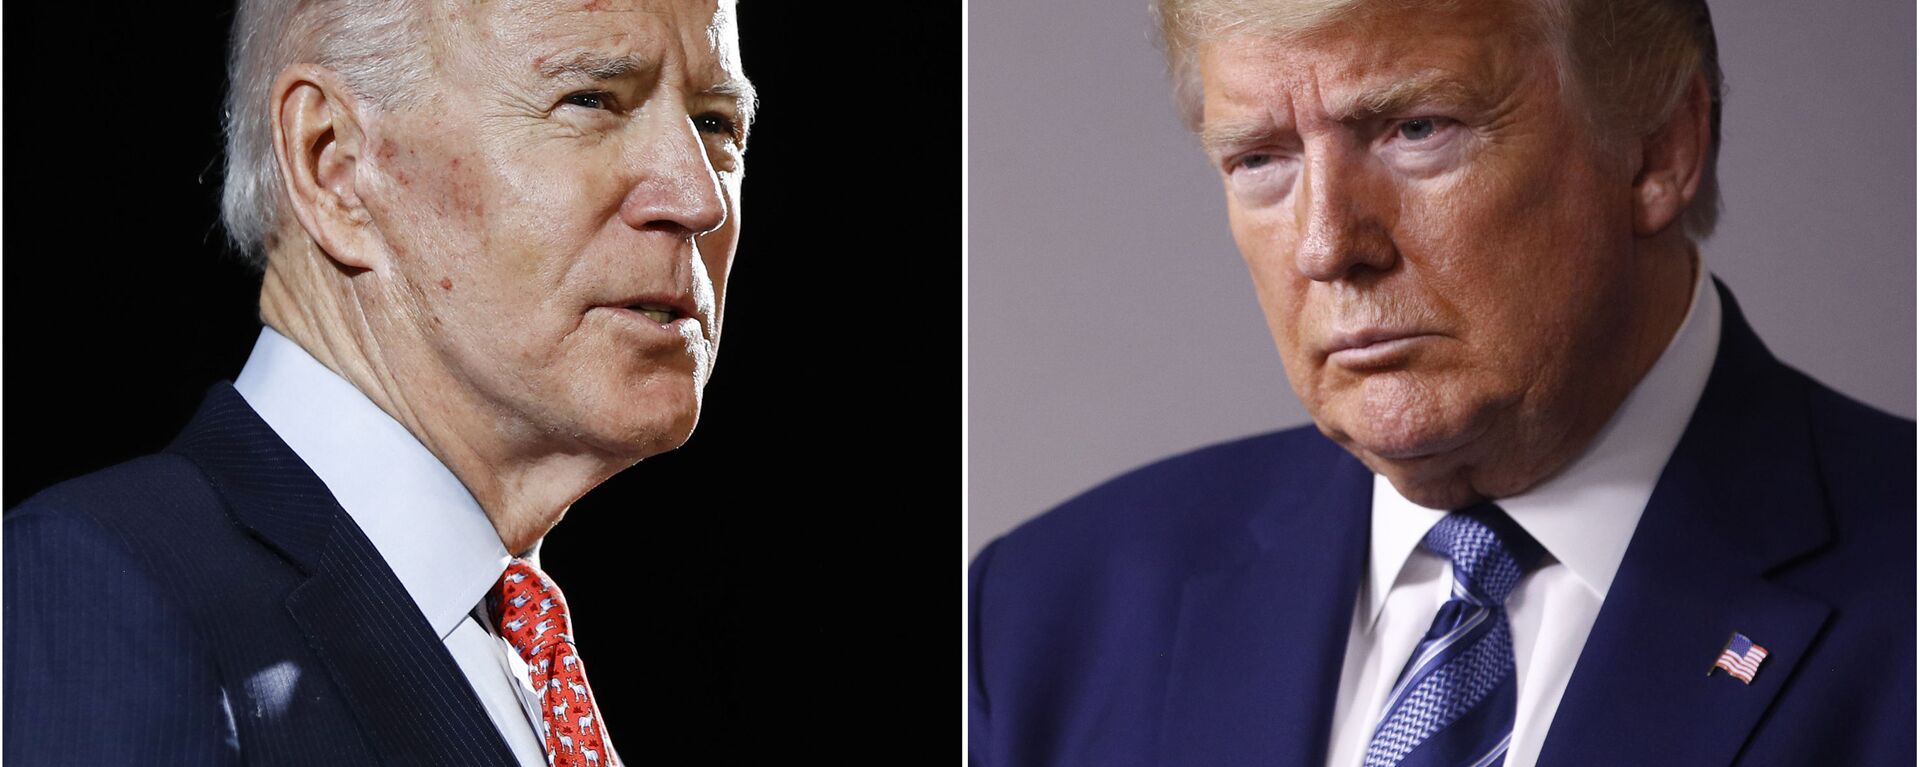 FILE - In this combination of file photos, former Vice President Joe Biden speaks in Wilmington, Del., on March 12, 2020, left, and President Donald Trump speaks at the White House in Washington on April 5, 2020. Trump has accused his Democratic rival Biden of having connections to the “radical left” and has pilloried his relationship with China, his record on criminal justice, his plans for the pandemic and even his son's business dealings. (AP Photo, File) - اسپوتنیک افغانستان  , 1920, 22.12.2021